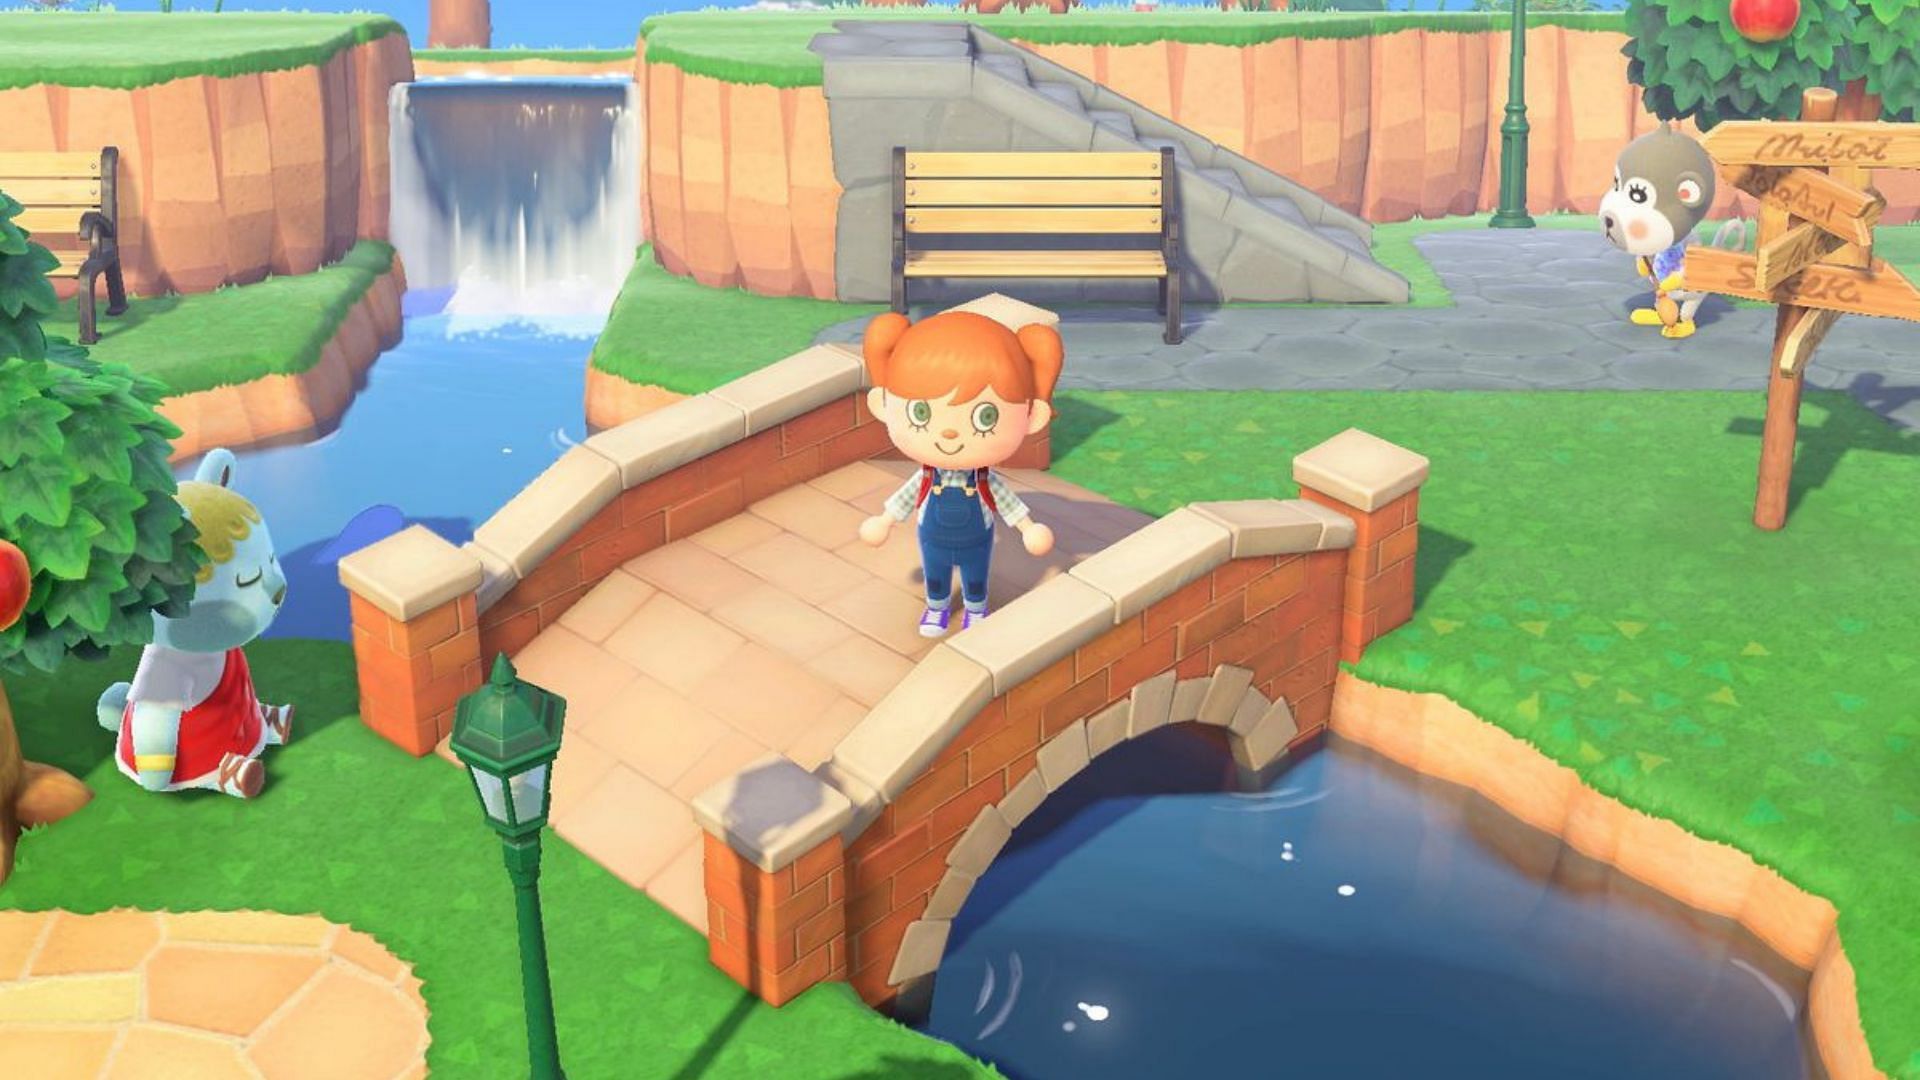 Players are wondering if Animal Crossing: New Horizons is nearing its end in 2022 (Image via Nintendo)